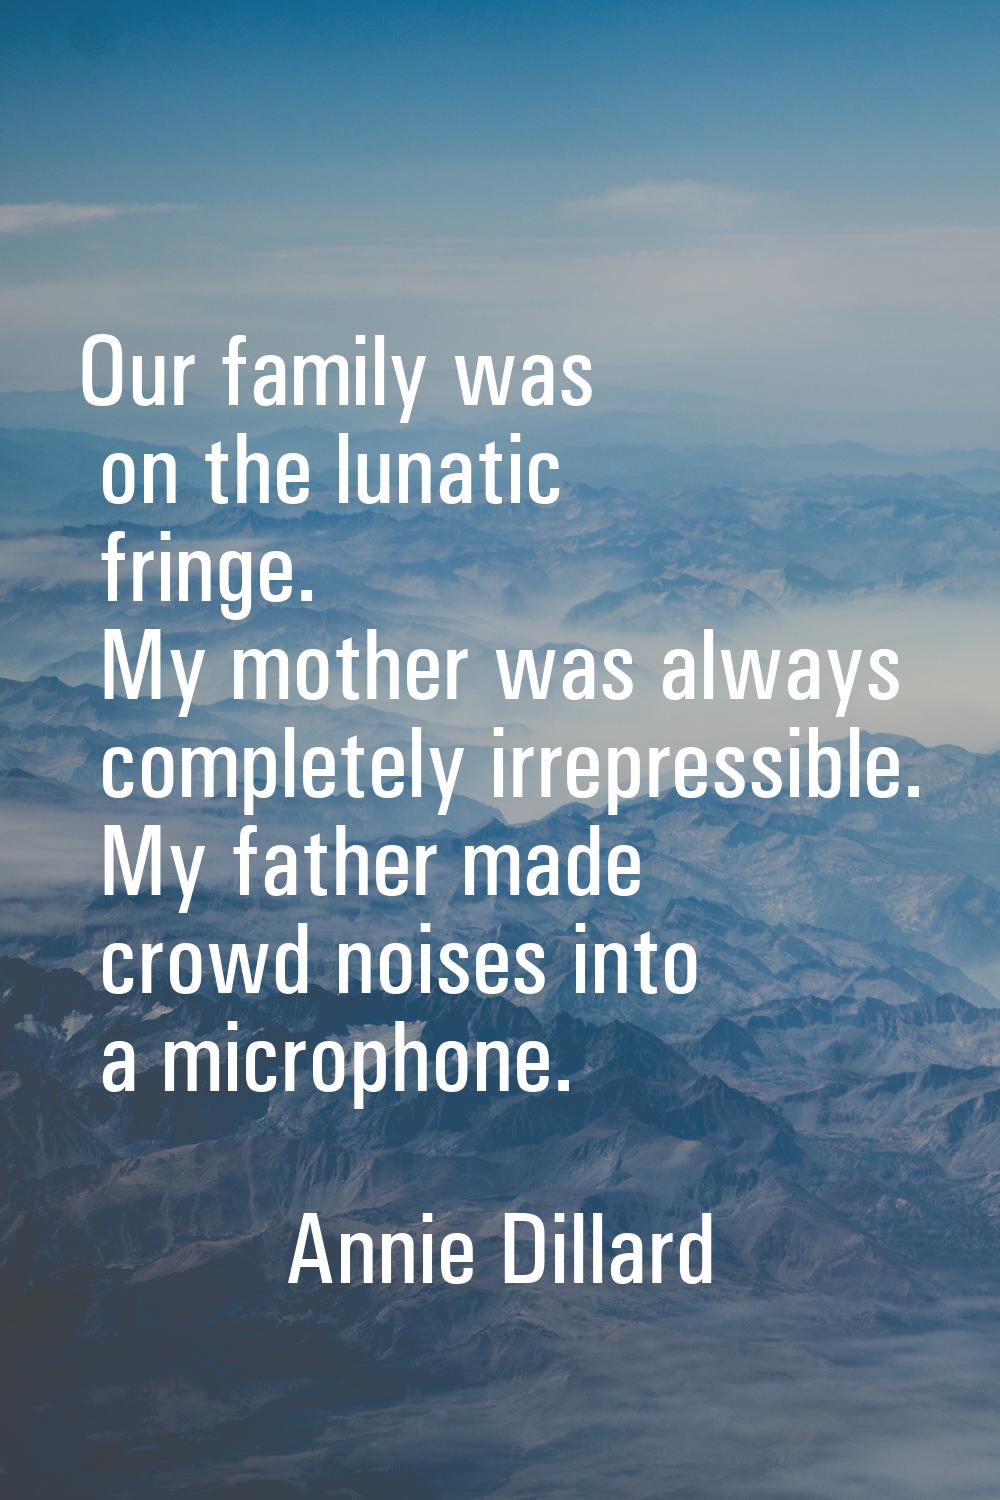 Our family was on the lunatic fringe. My mother was always completely irrepressible. My father made